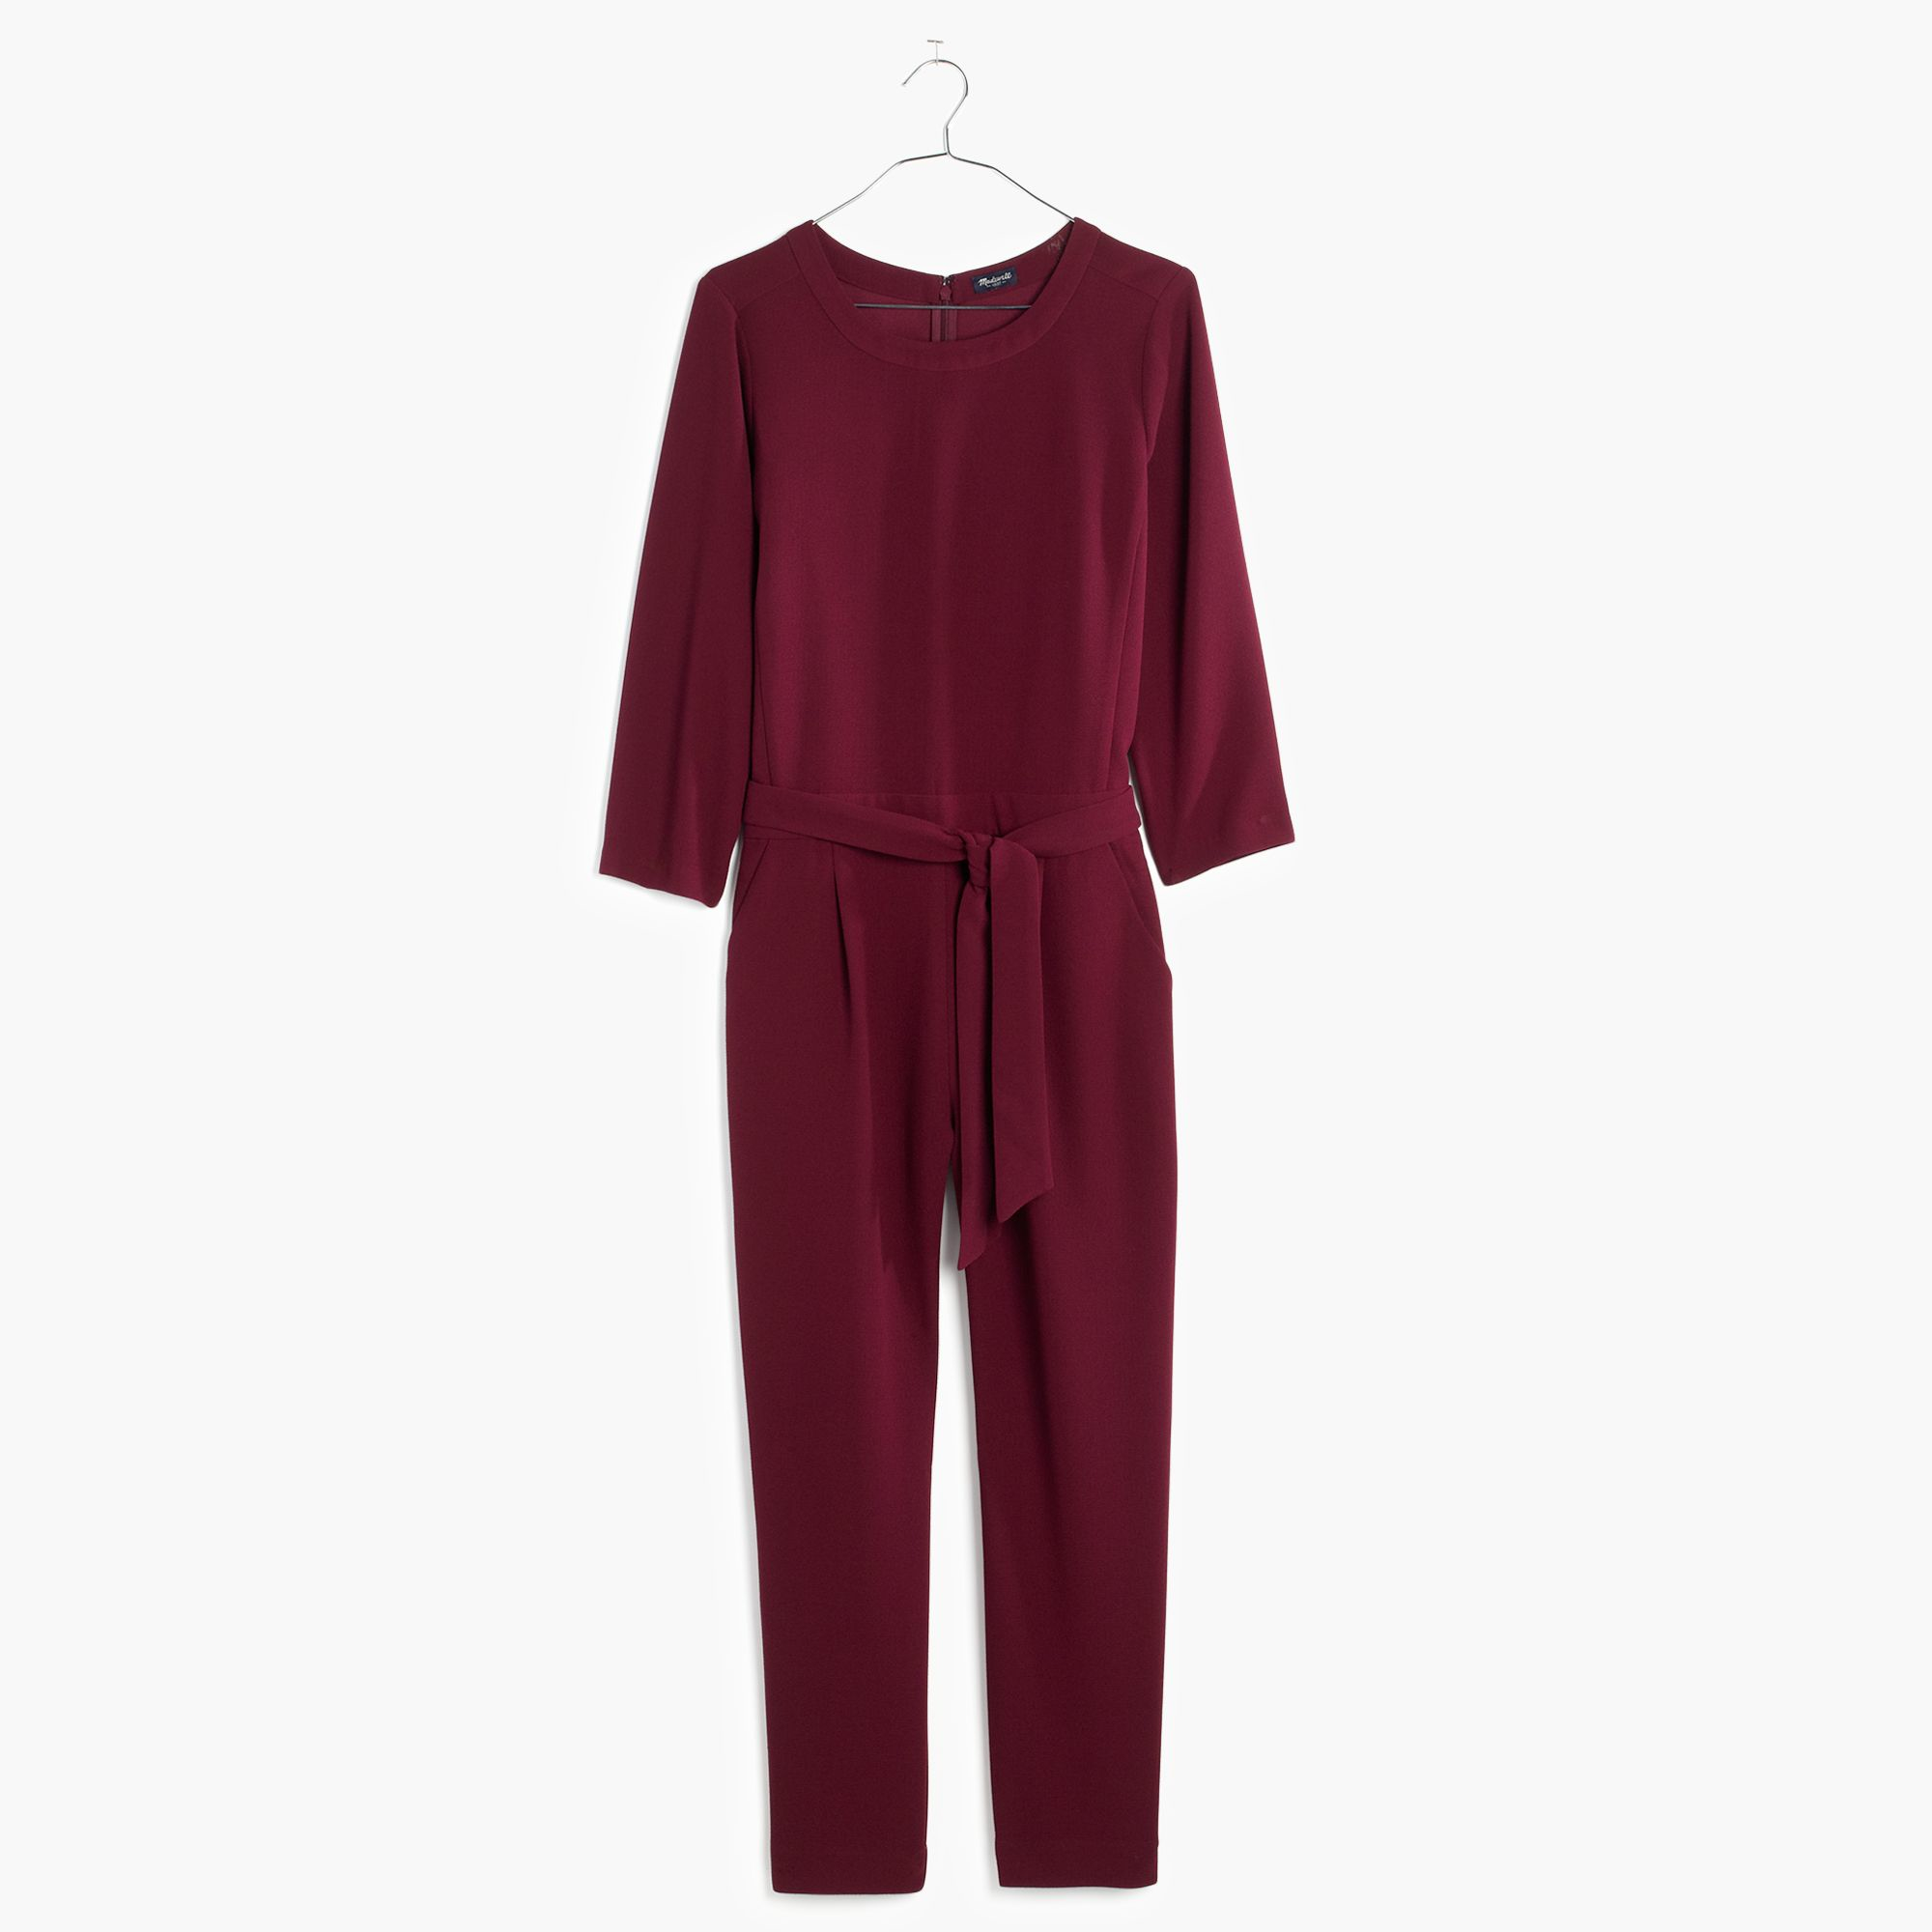 Madewell Sloan Jumpsuit in Red - Lyst